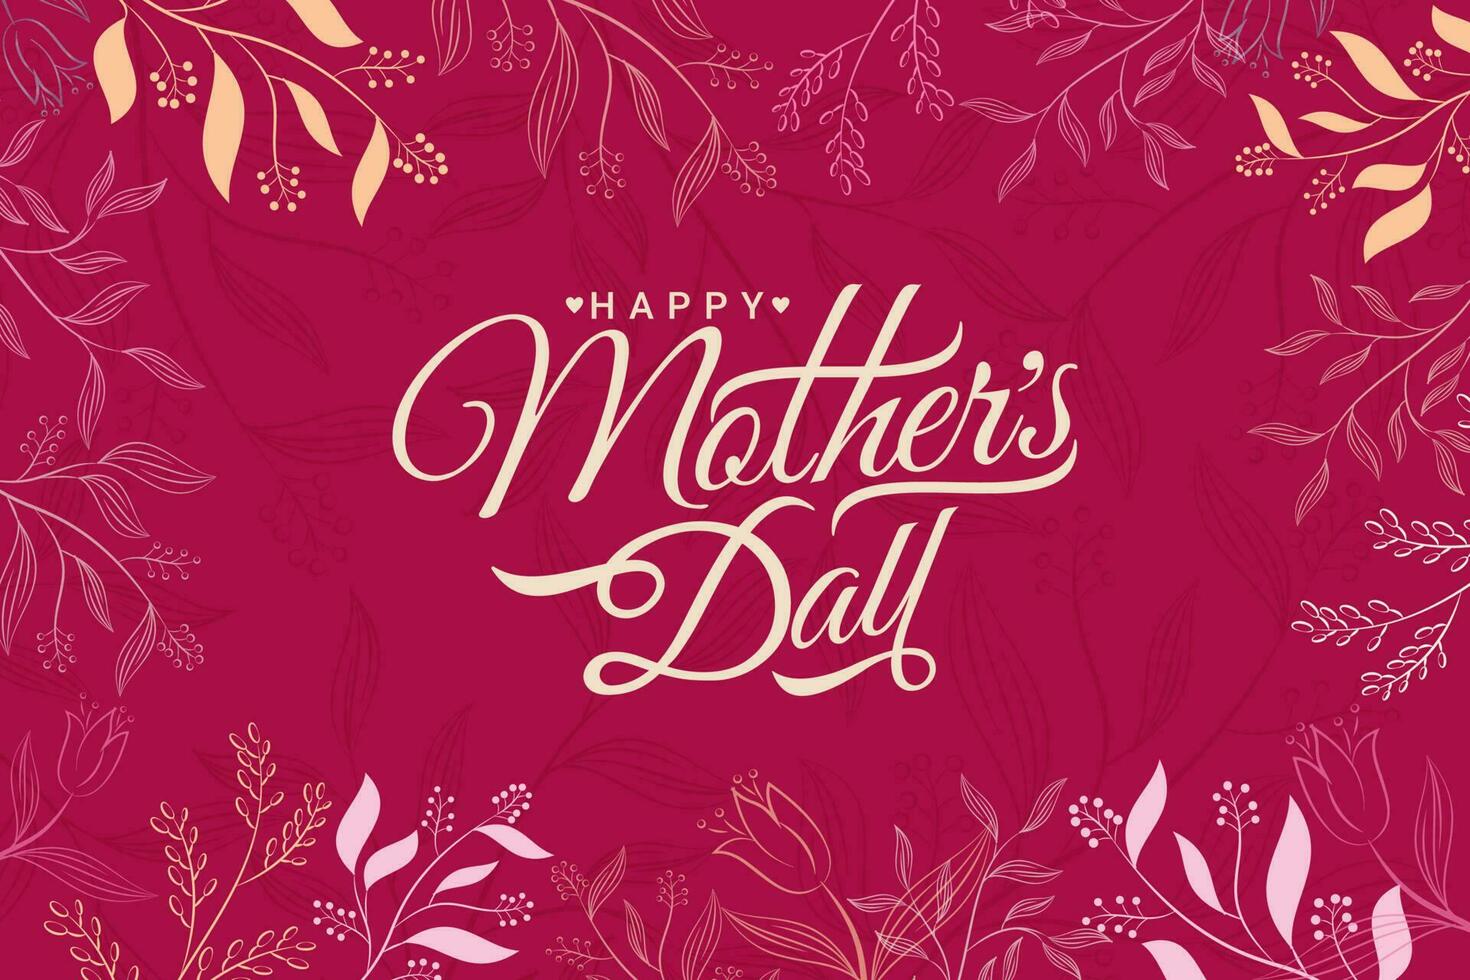 Mother's day greeting template for background, banner, poster, cover design, social media feed vector